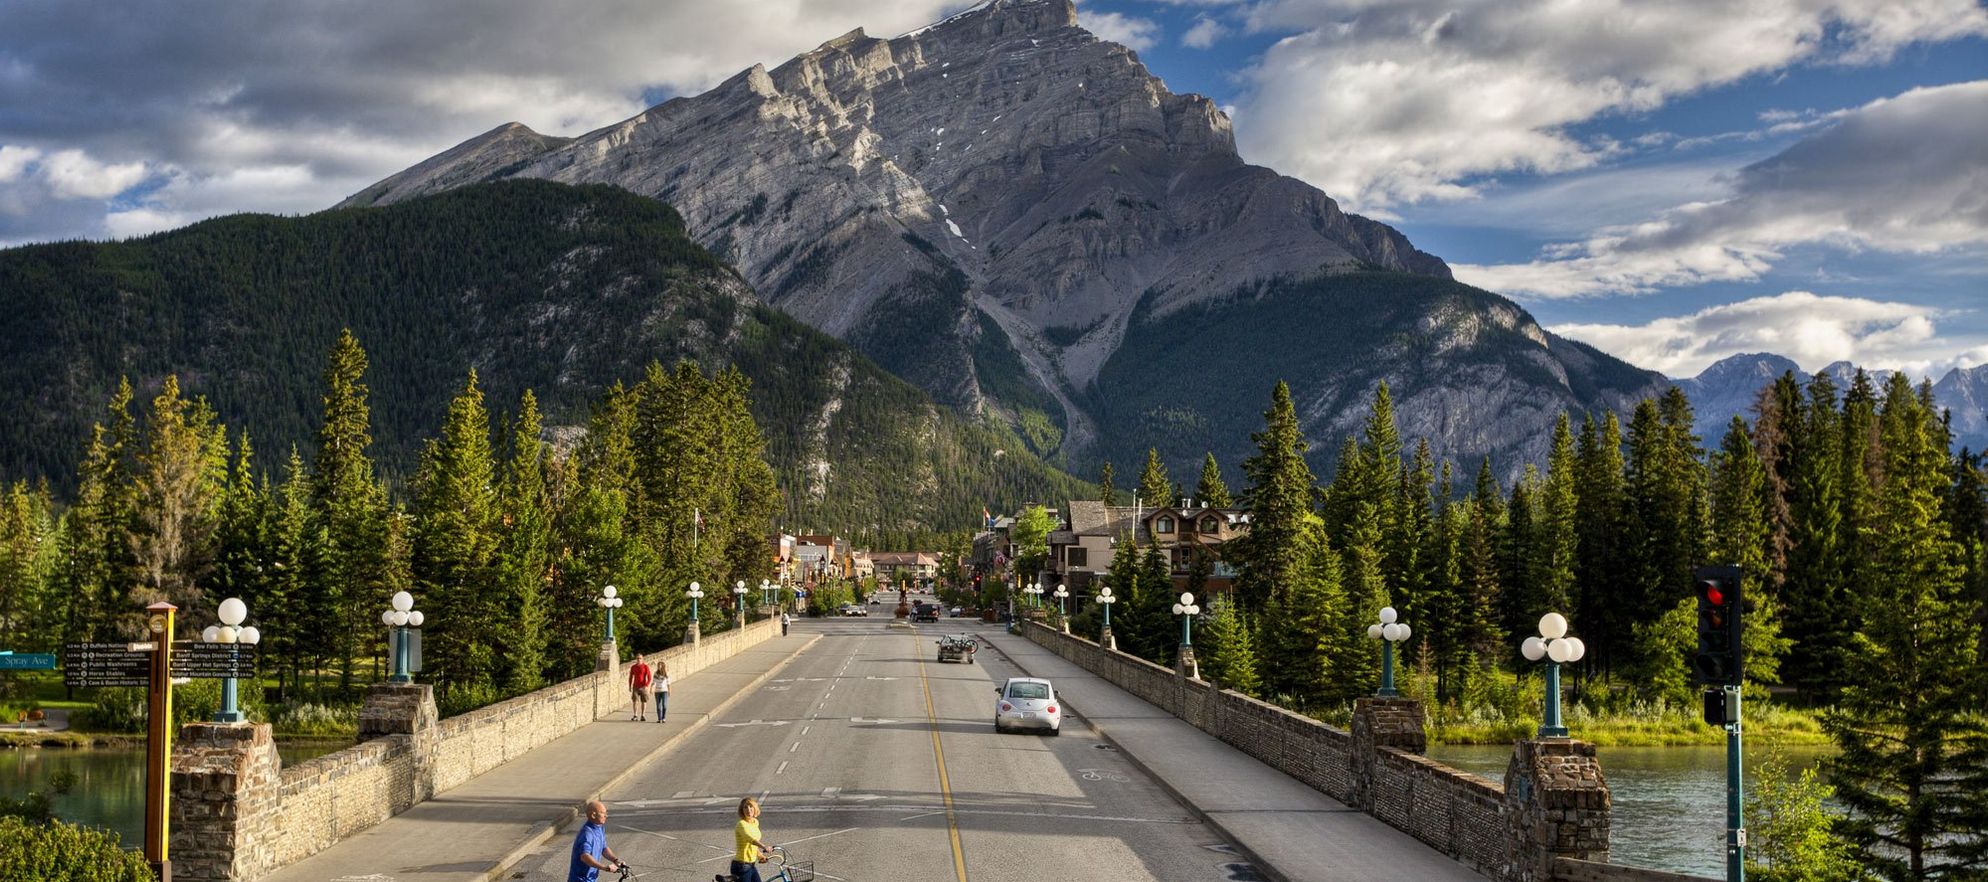 Town of Banff boulevard view of Mt. Rundle